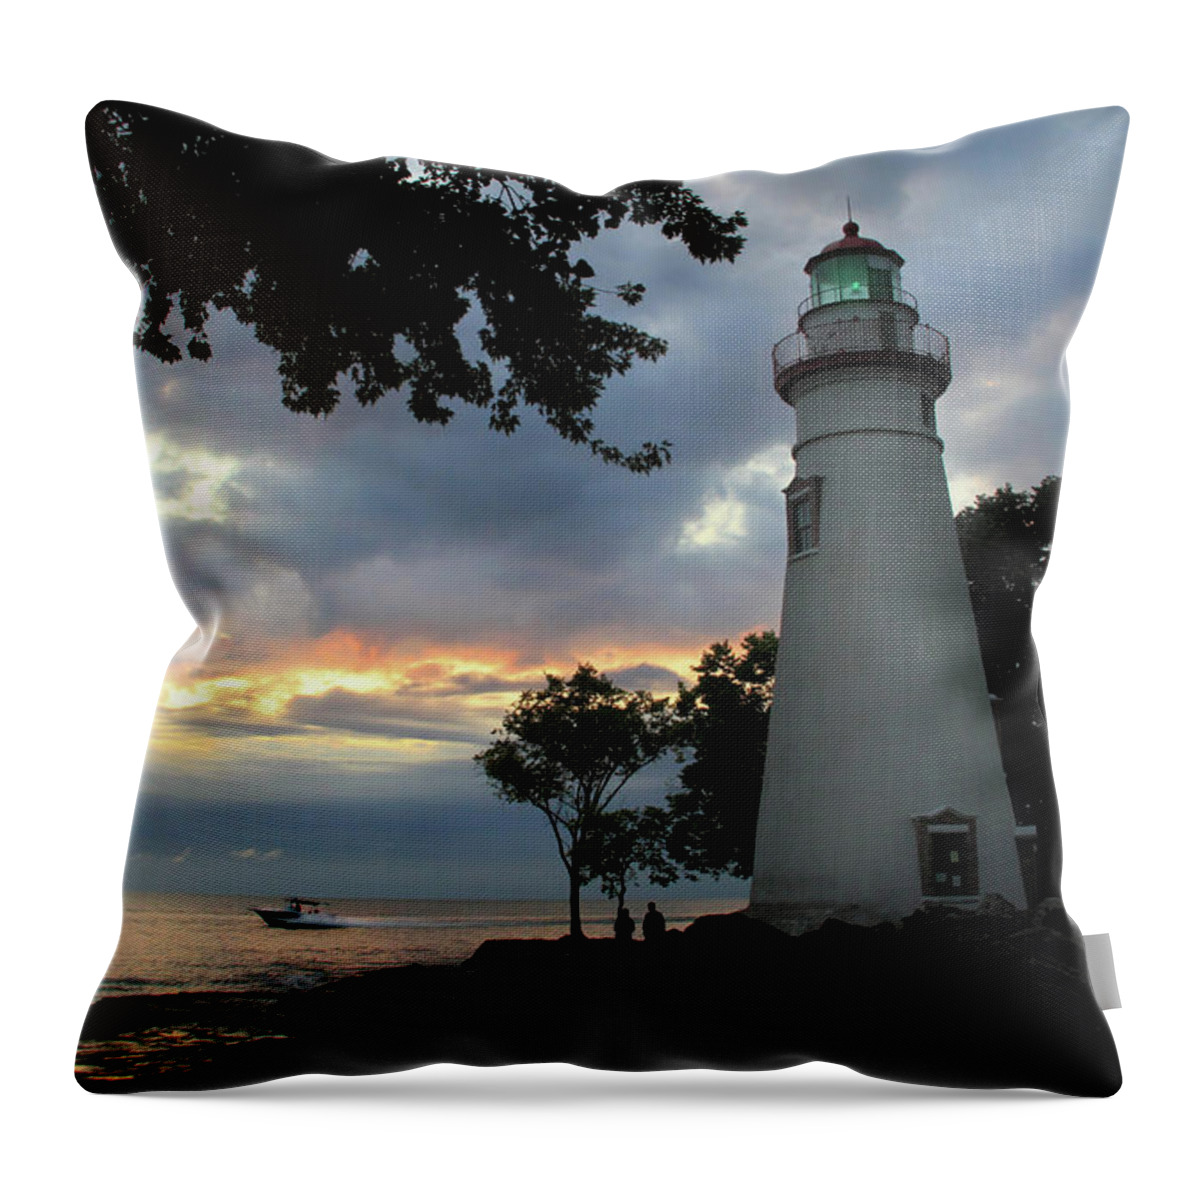 Marblehead Lighthouse Throw Pillow featuring the photograph Marblehead Lighthouse by Angela Murdock